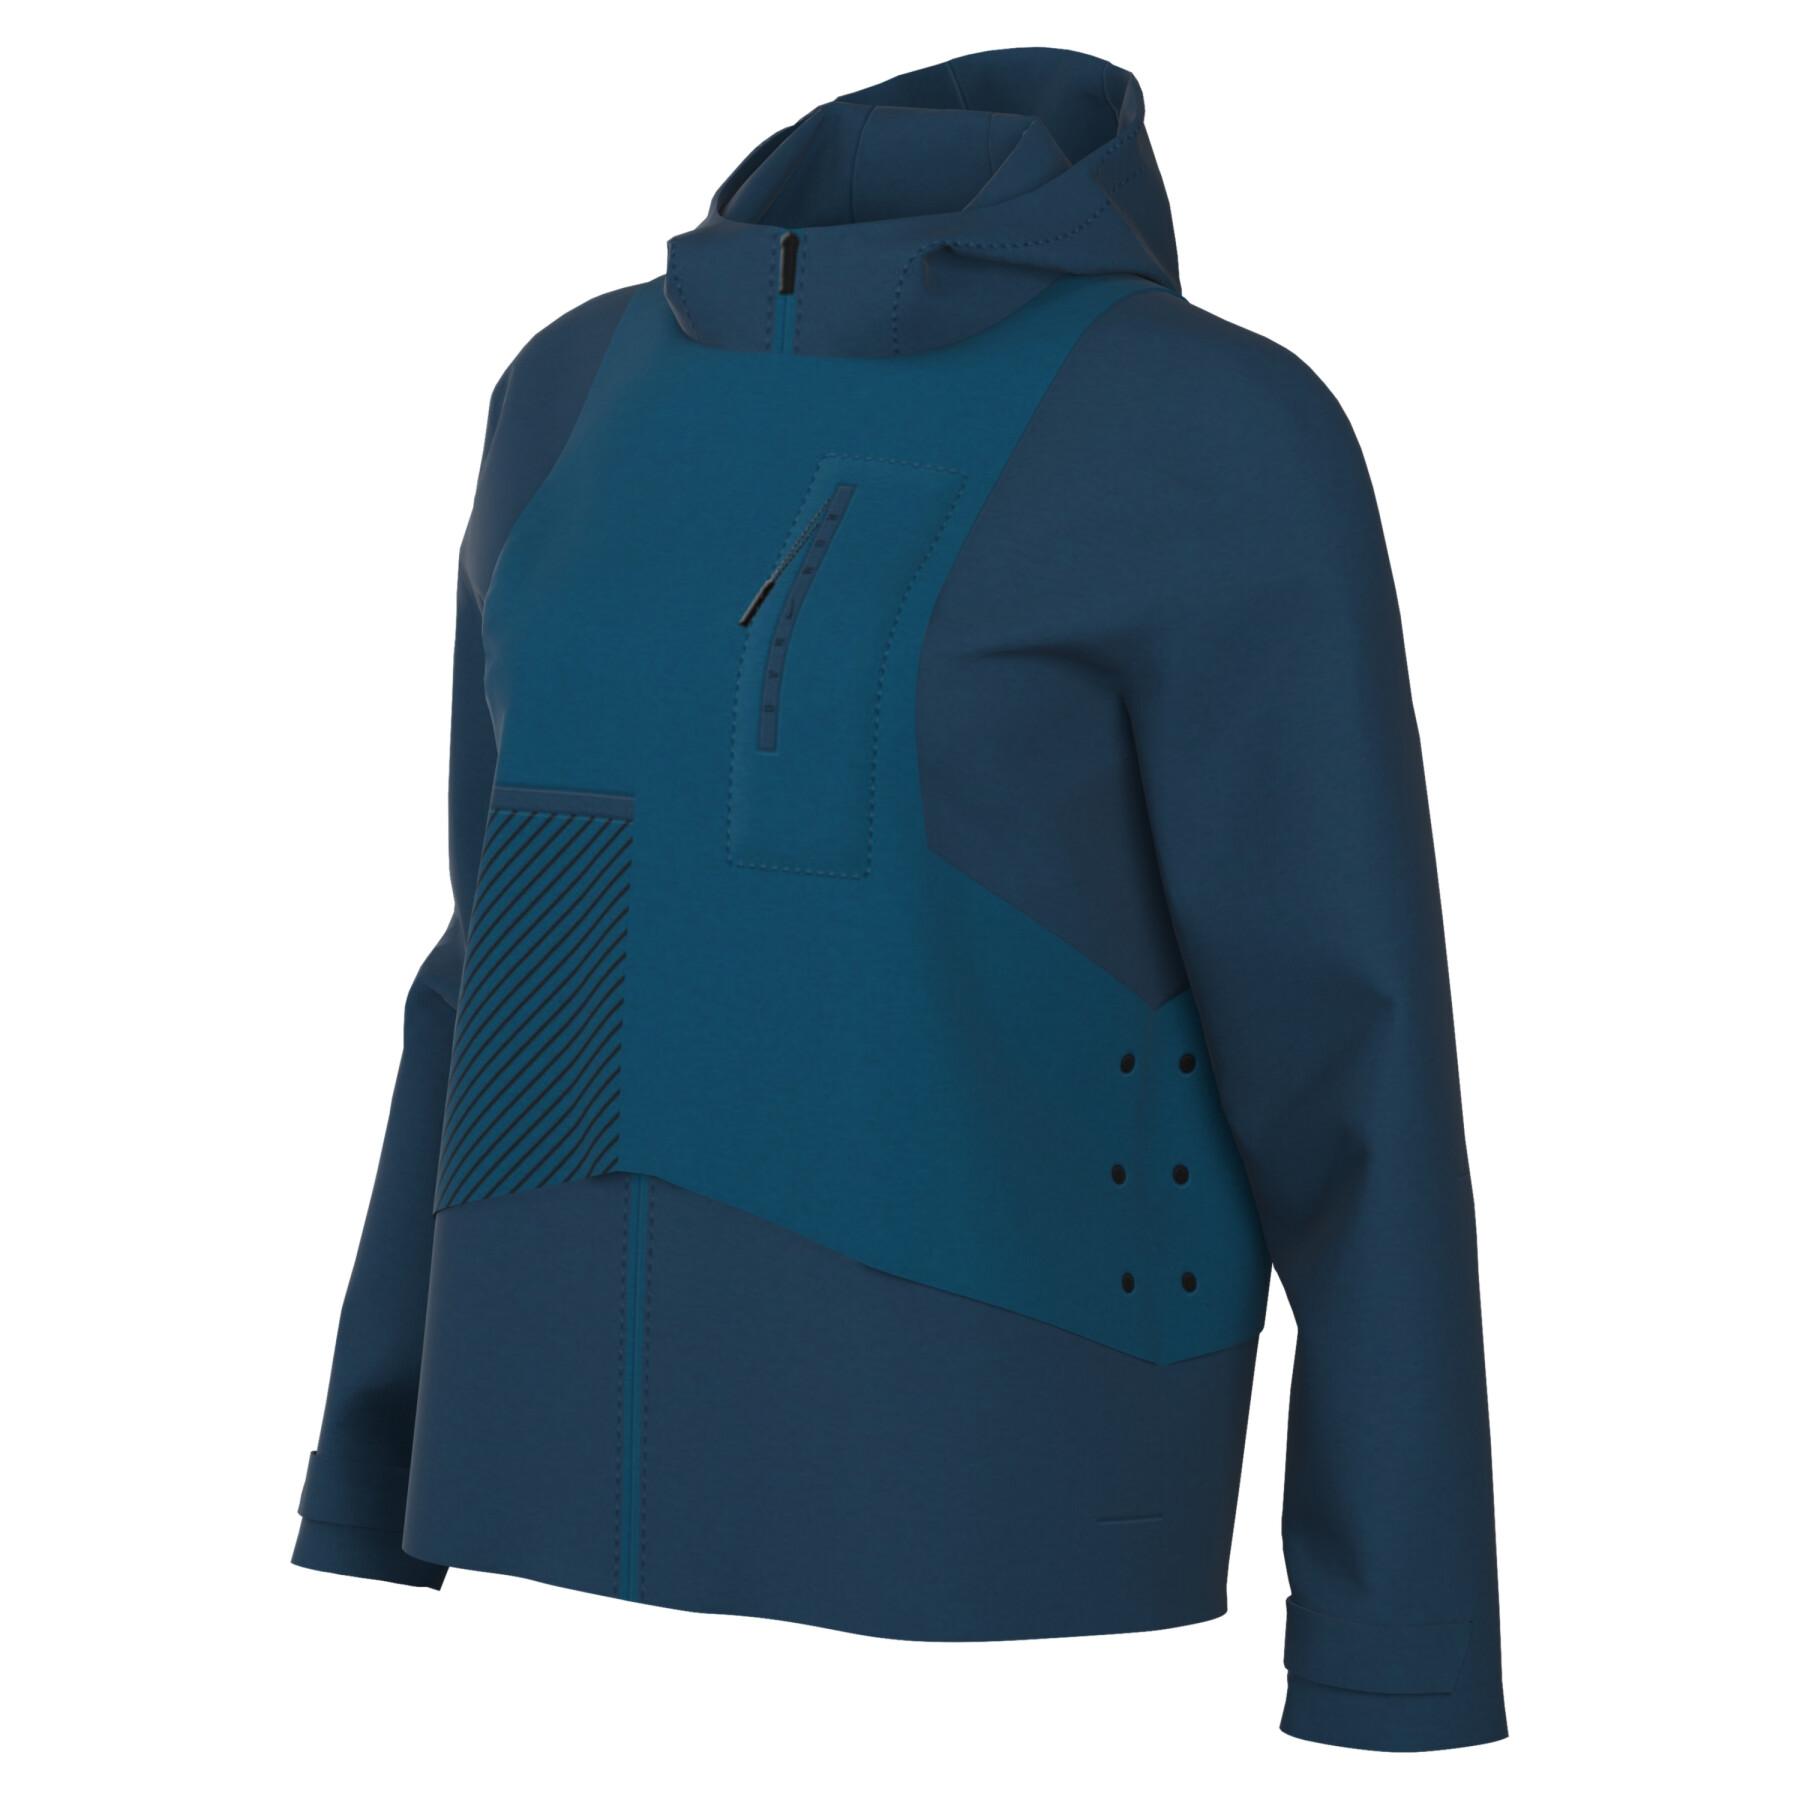 Waterproof jacket with zipped hood for women Nike Storm-FIT Run Division